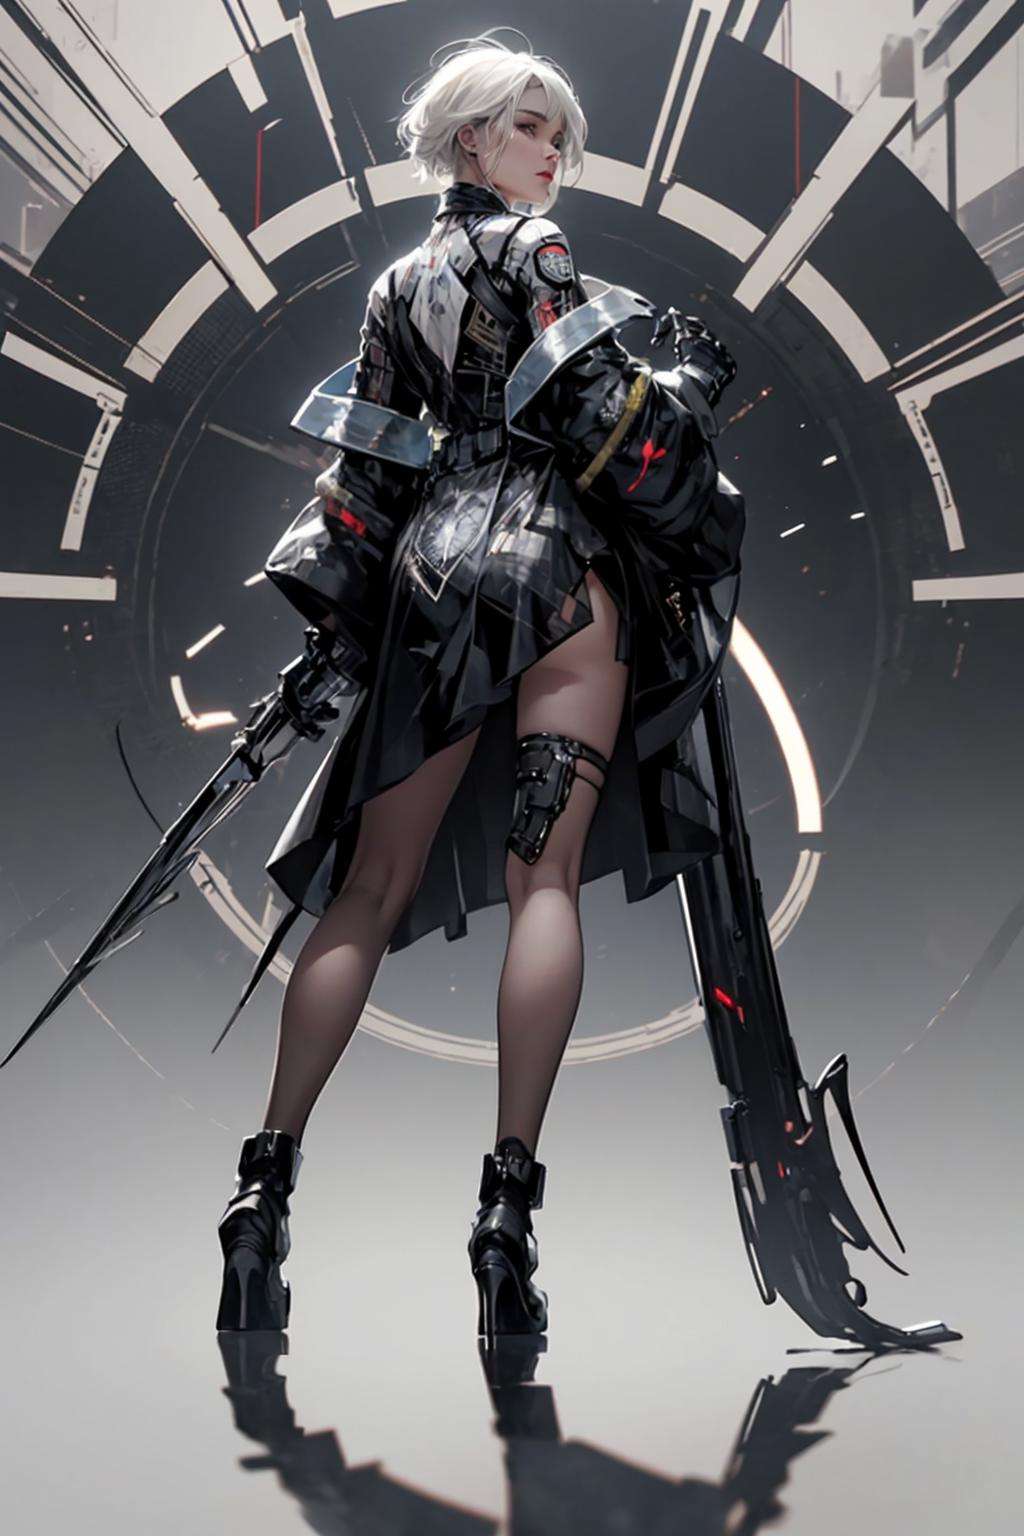 futubot, futuristic, 2030s, jet wings, exoskeleton showing. xray view, glowing circuit, gears, robotic parts, magic staff, super tech, mega mode, super heroine, witch, cyber alice, warrior princess, white hair, robe, sacred patterns, magic sceptre, witchcraft, vibrant colors, hypnotic colors, cyberpunk, Taylor lashae, captain marvel, Valkyrie, helm, wings,goddess, priestess, witch, draped in cloth, angel, young beautiful model, standing forward facing, gucci, vogue, Prada, full body Alice pagani, skin is partially covered with cybernetic networking, black light, wearing neon lined clothes, wings on back, jet boots, graffiti patterns , punk jacket , transparent tech goggles, standing in a futuristic city, glossy, avant garde, Bjork, lorde, grace charis, highly intricate, high minimalistic fashion, photography by tim walker, clear modeface features, punk hair, piercings, fashion editorial accent lighting, cinematic, blurred white clear background, photorealistic octane render, HD 8K DSLR, sharp focus, depth   <lora:Futuristicbotv.2:0.7> 